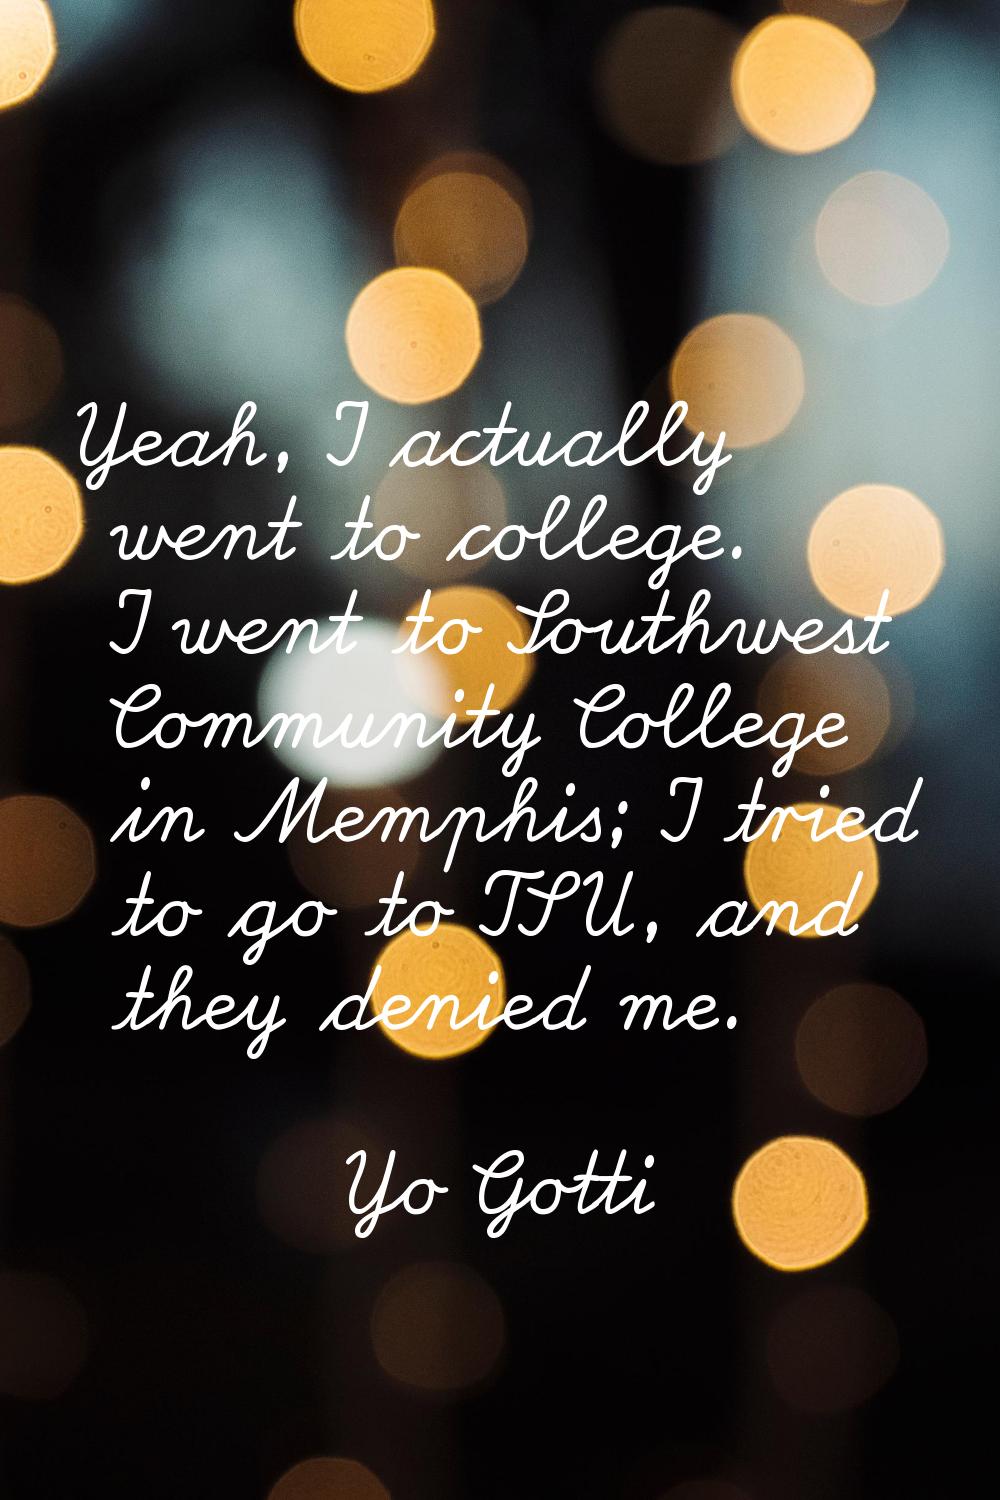 Yeah, I actually went to college. I went to Southwest Community College in Memphis; I tried to go t